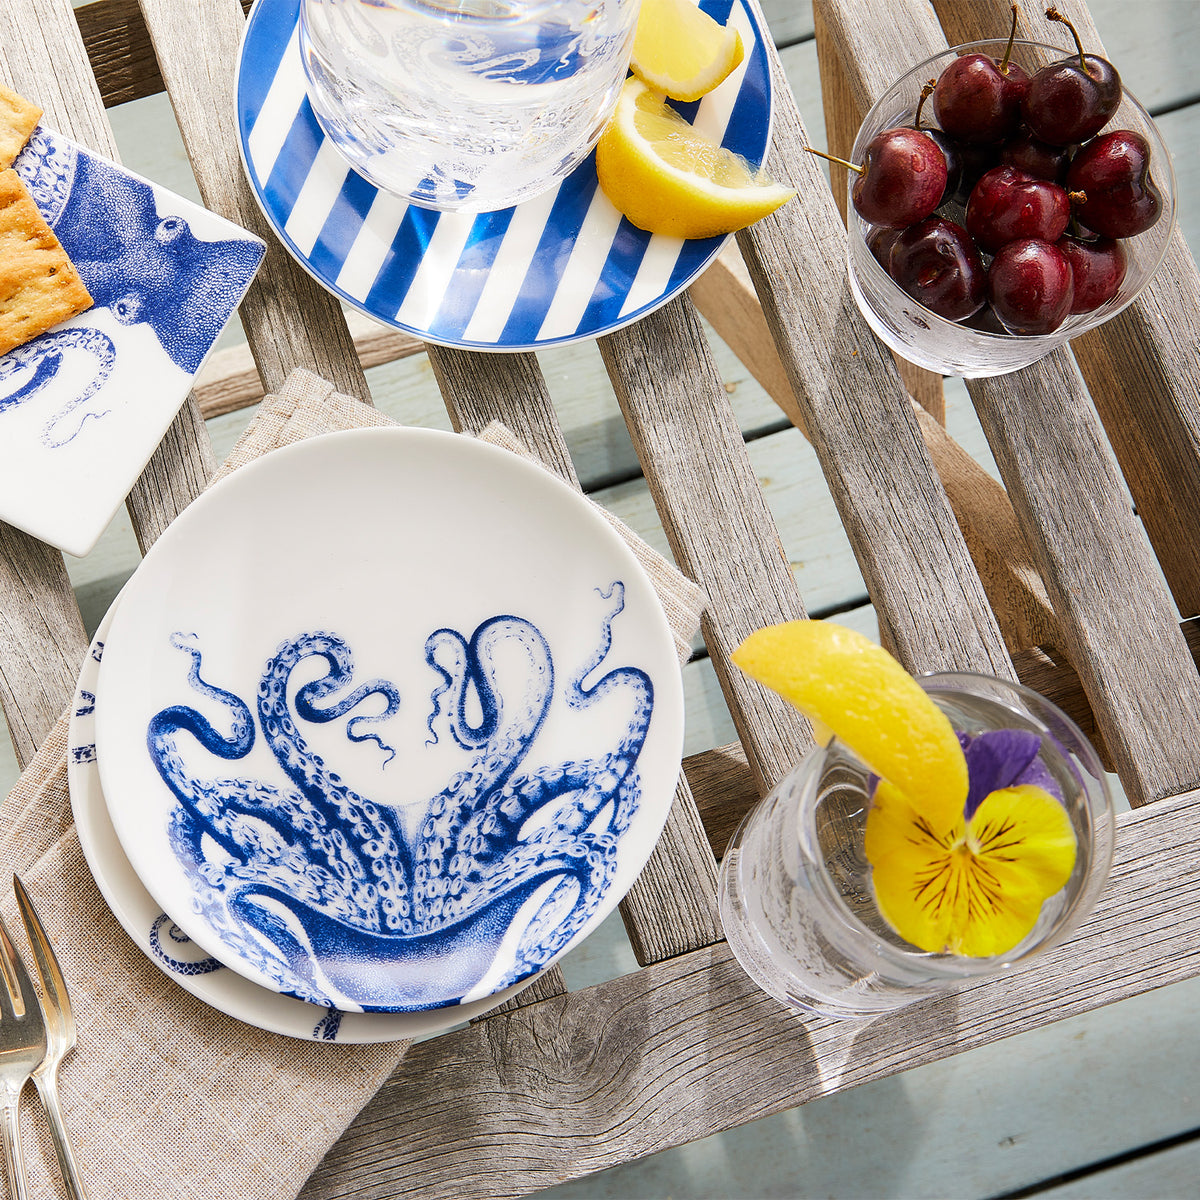 A wooden table set with a plate of cherries, a glass of water with lemon and a flower, heirloom-quality dinnerware featuring Lucy Small Plates by Caskata Artisanal Home, a plate with crackers, and lemon wedges on a striped blue and white plate.